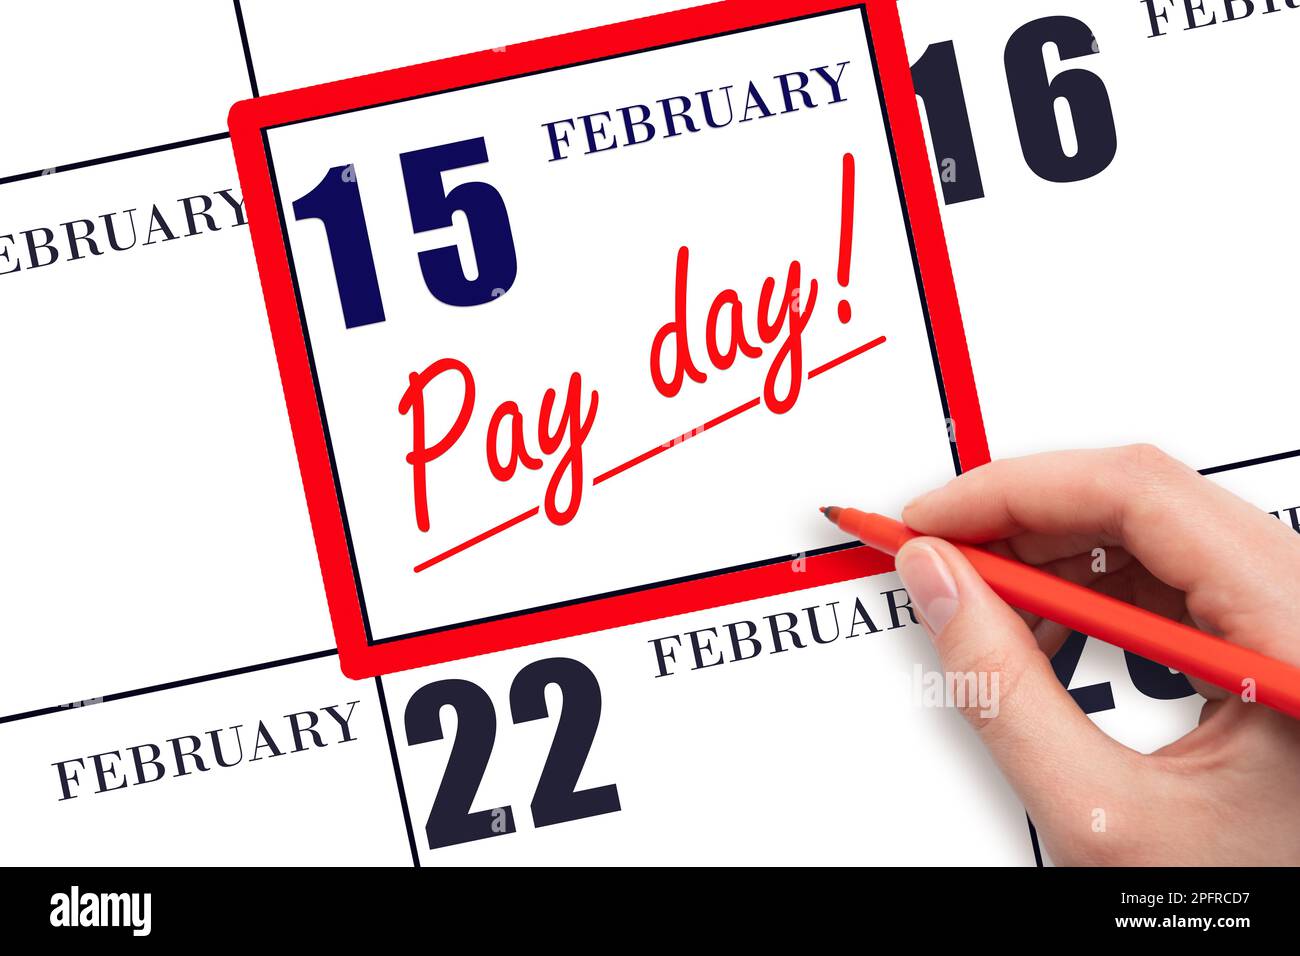 15th day of February. Hand writing text PAY DATE on calendar date February 15 and underline it. Payment due date.  Reminder concept of payment. Winter Stock Photo